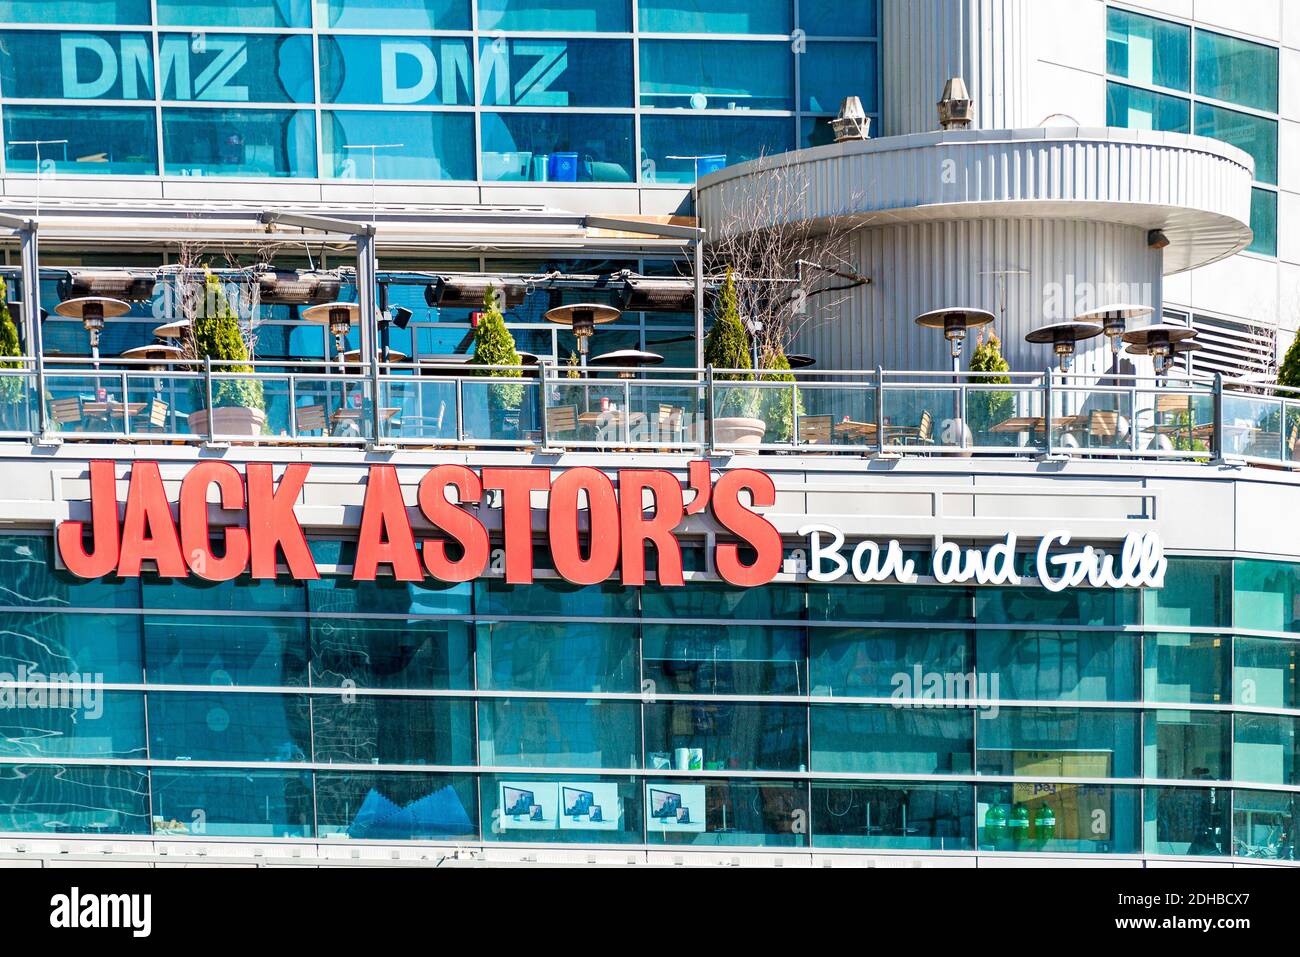 Jack Astors High Resolution Stock Photography and Images - Alamy